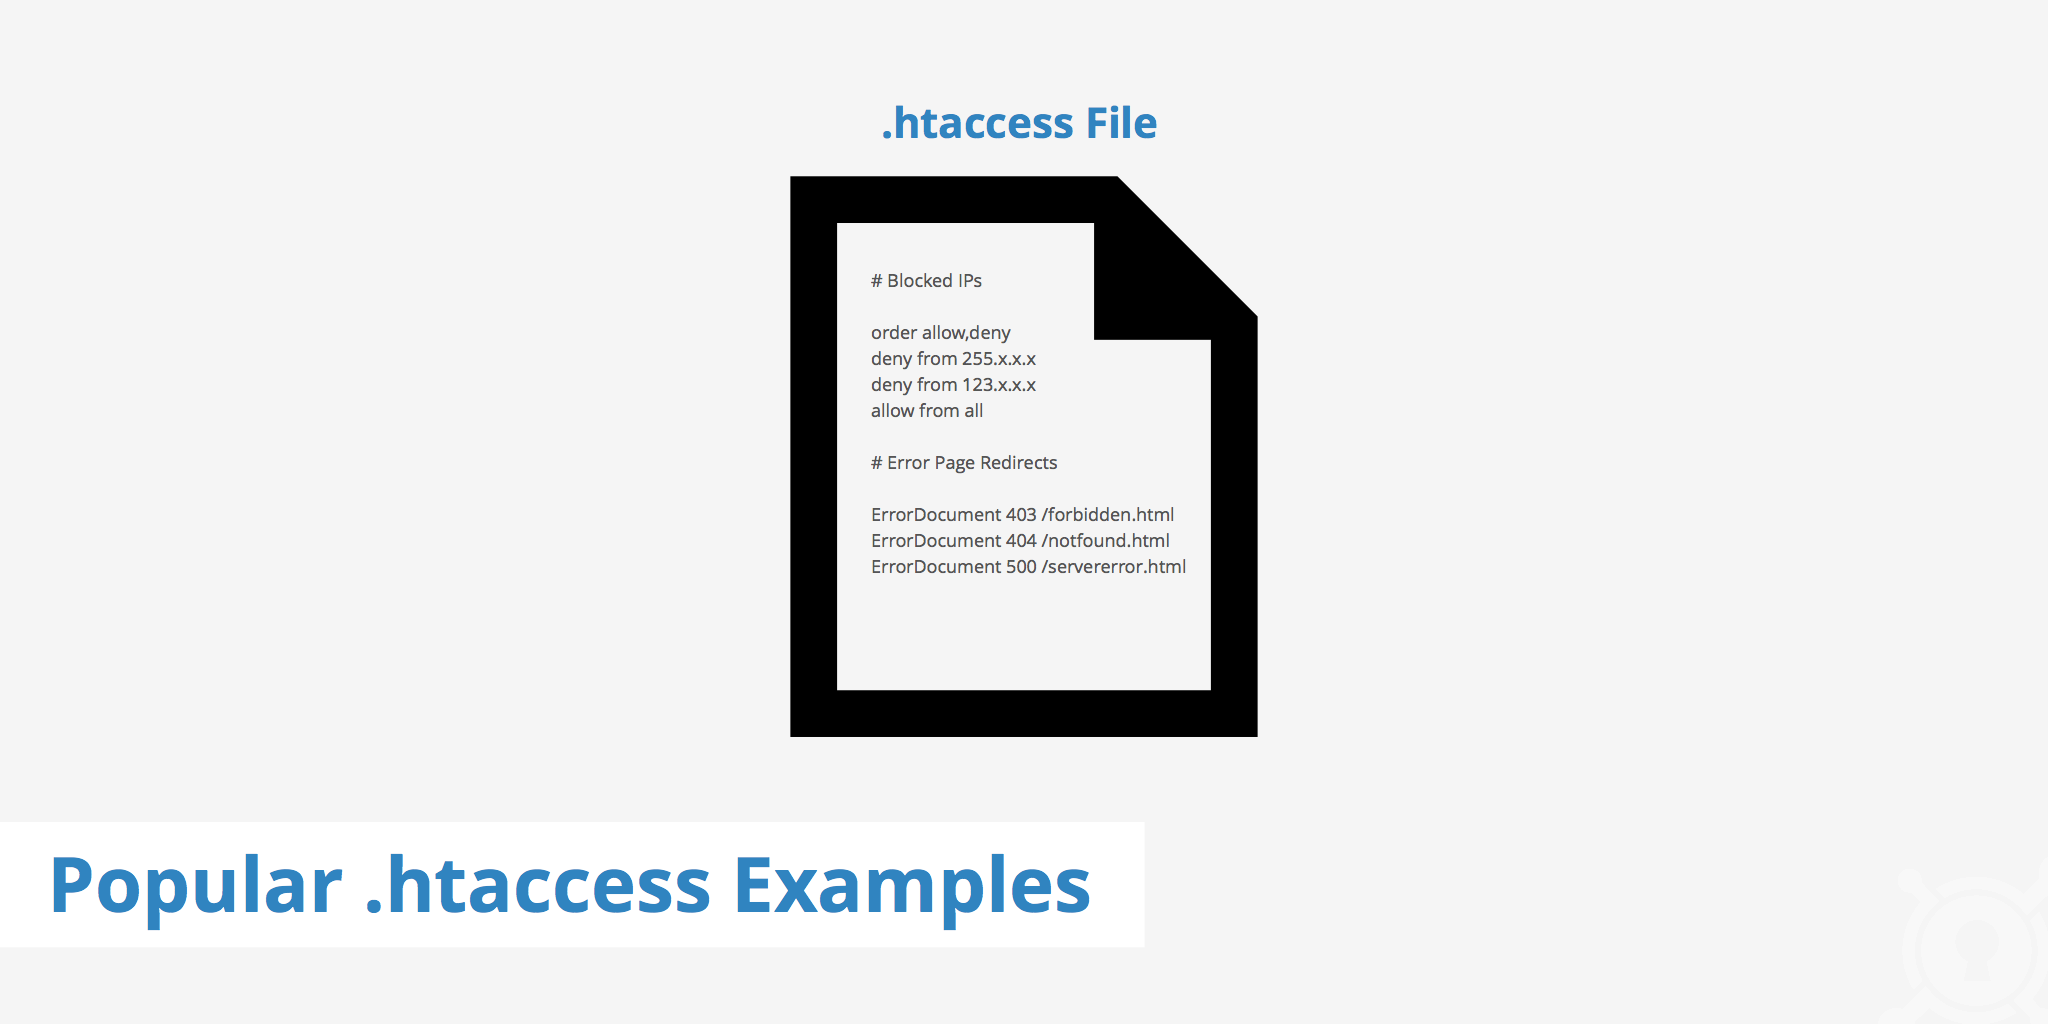 Popular .htaccess Examples